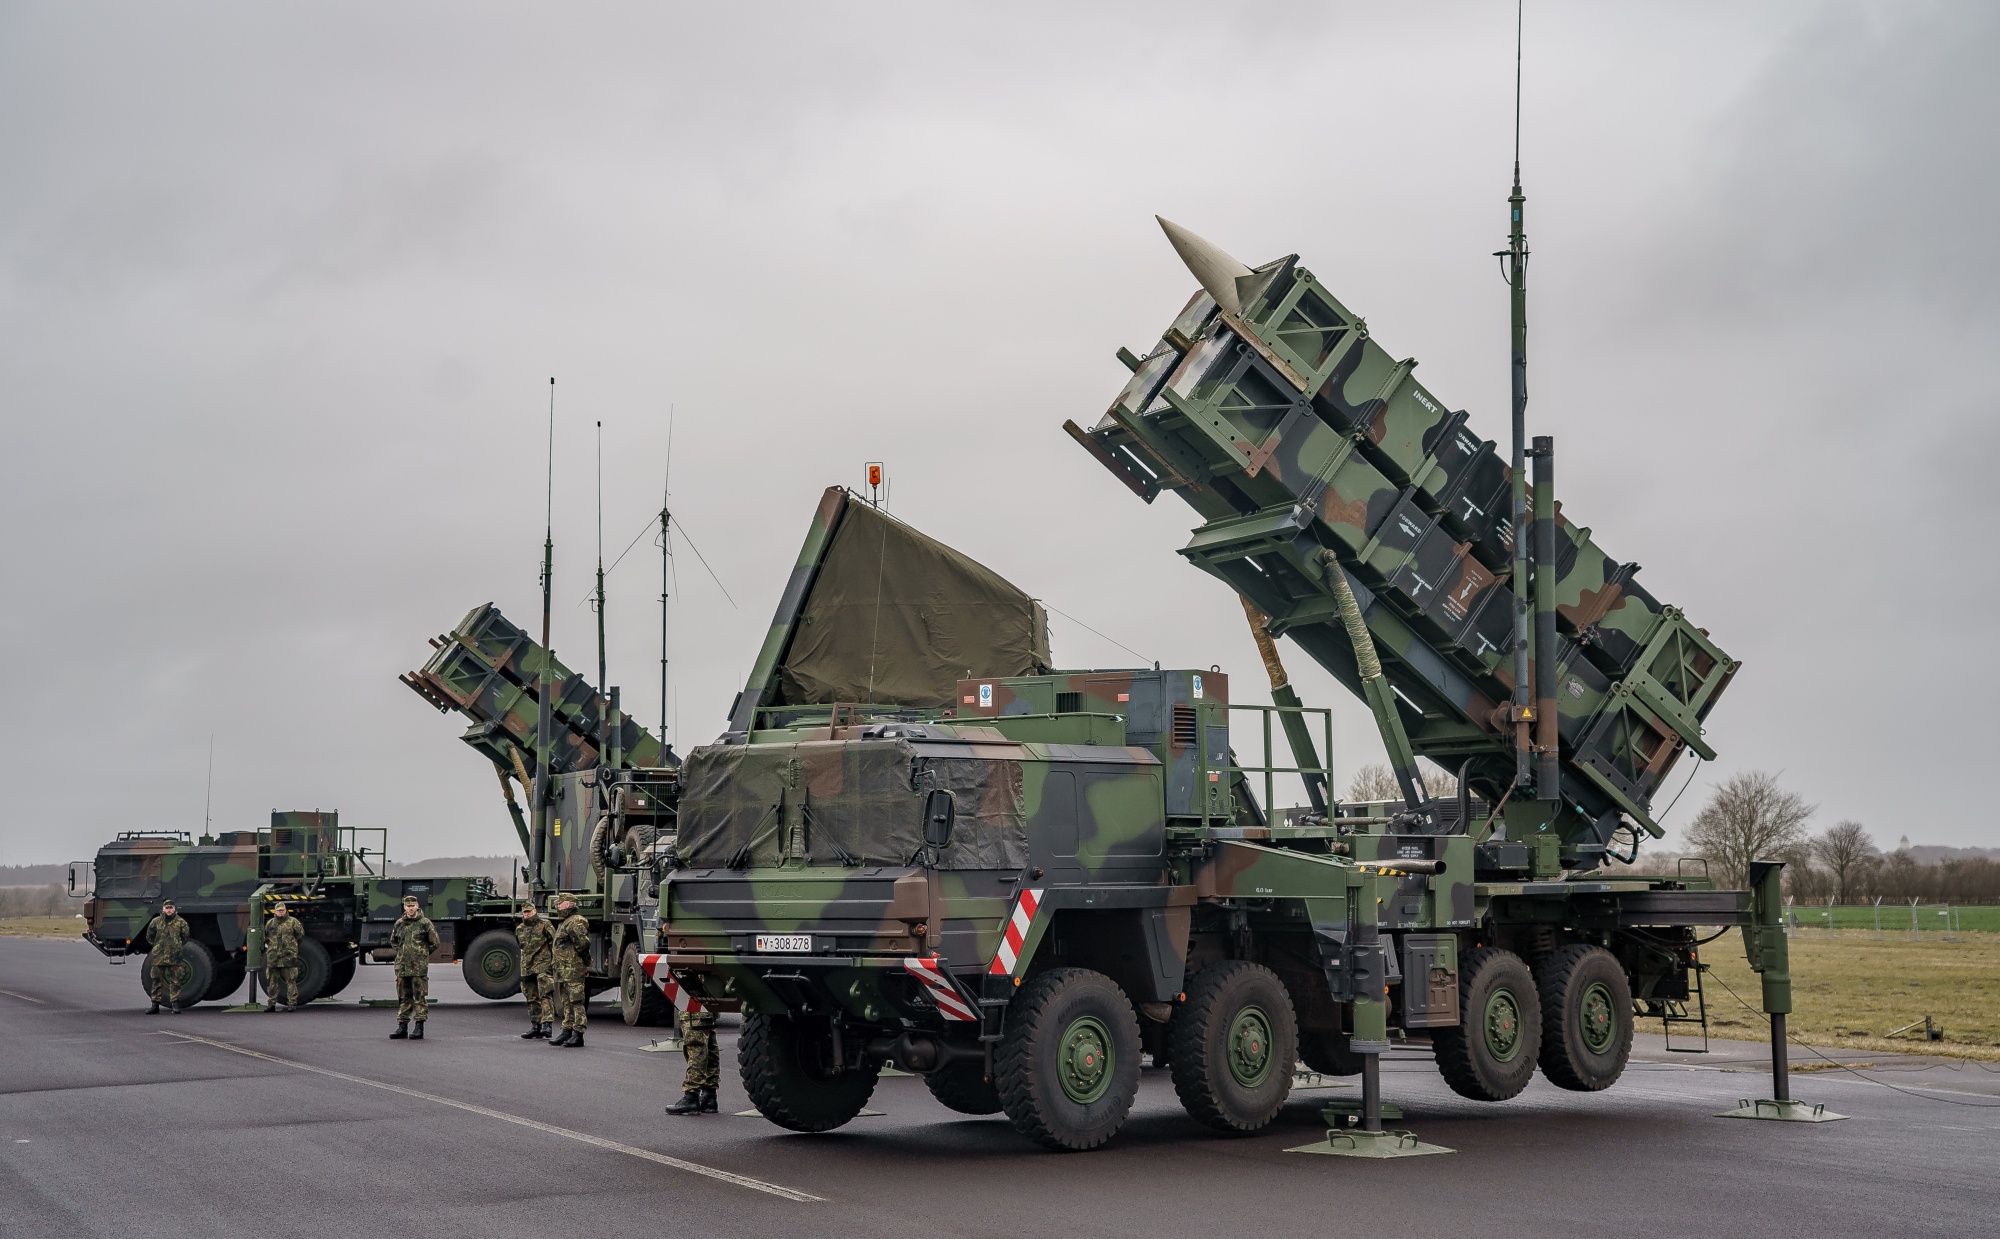 Warsaw protected by missile defence system for the first time in history - Poland deploys Patriot surface-to-air missile systems